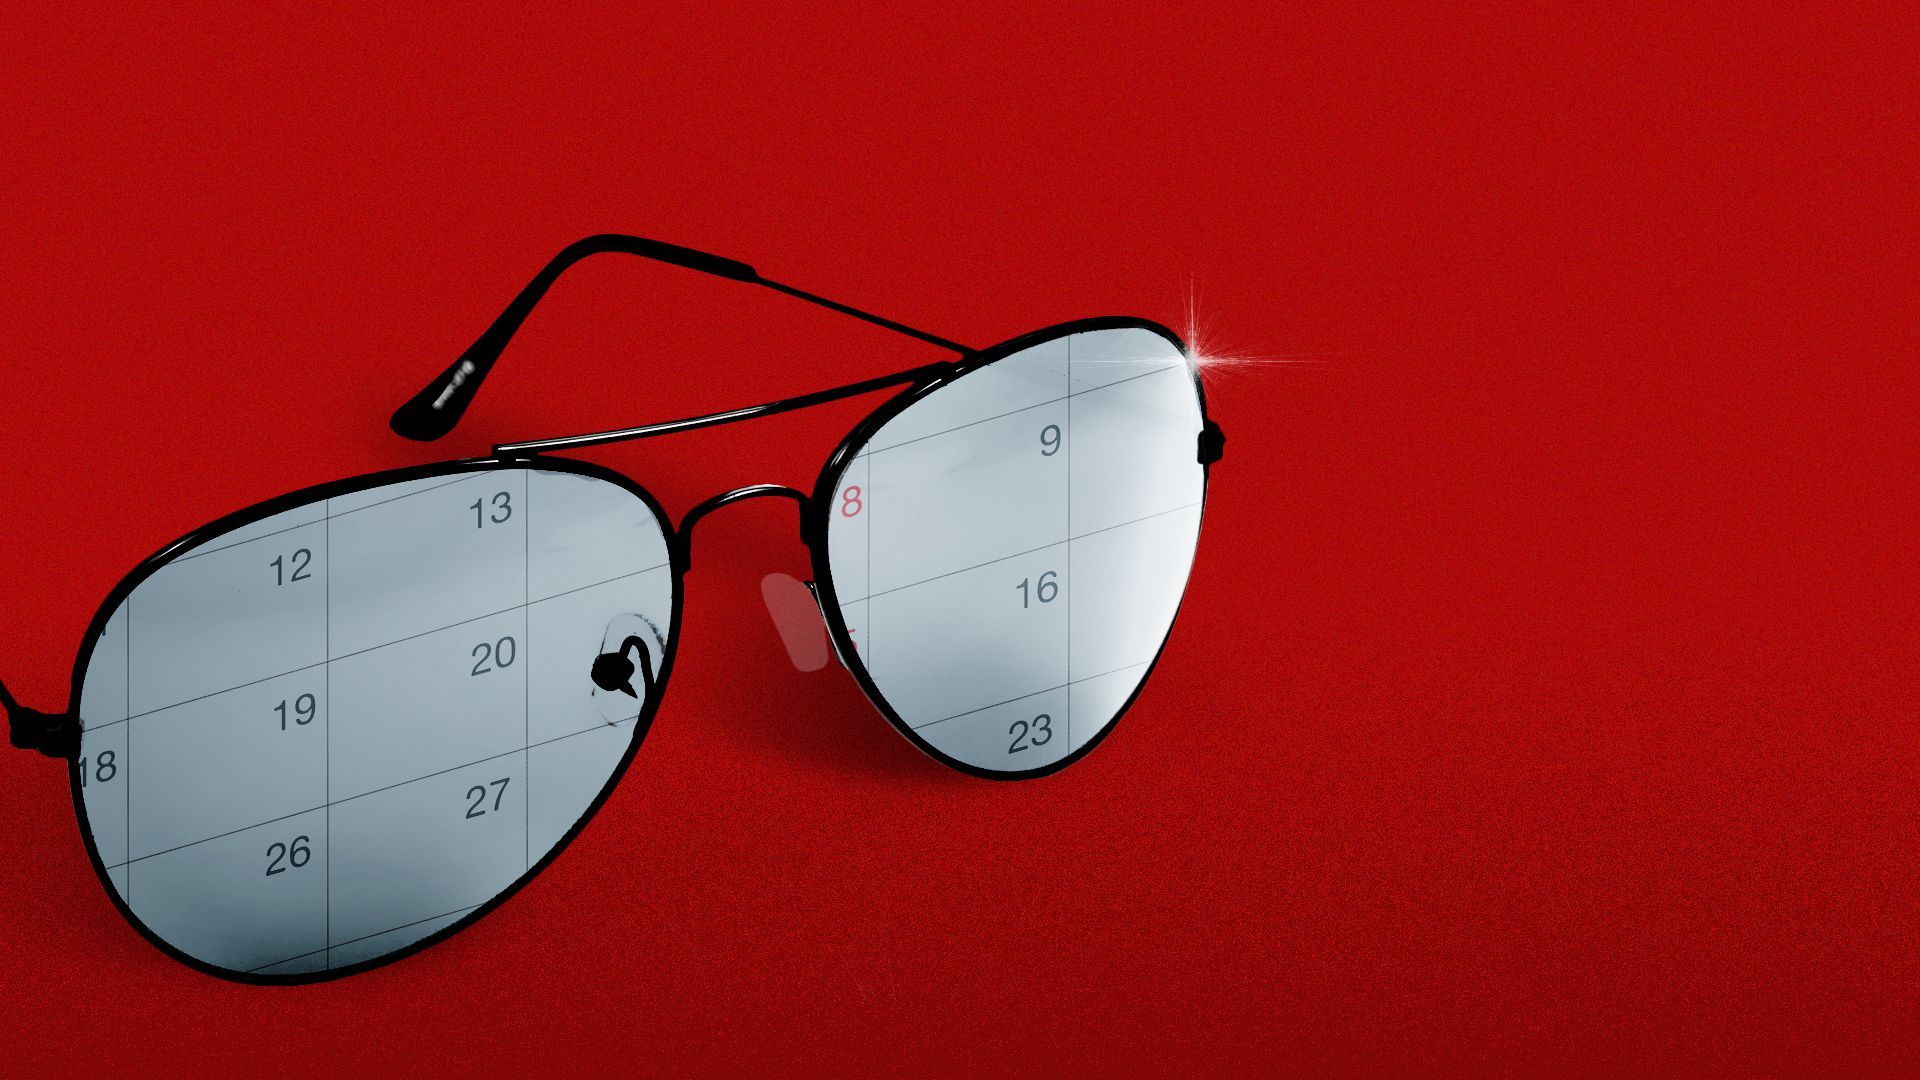 Illustration of a pair of Aviator sunglasses with a calendar reflected in the lenses.